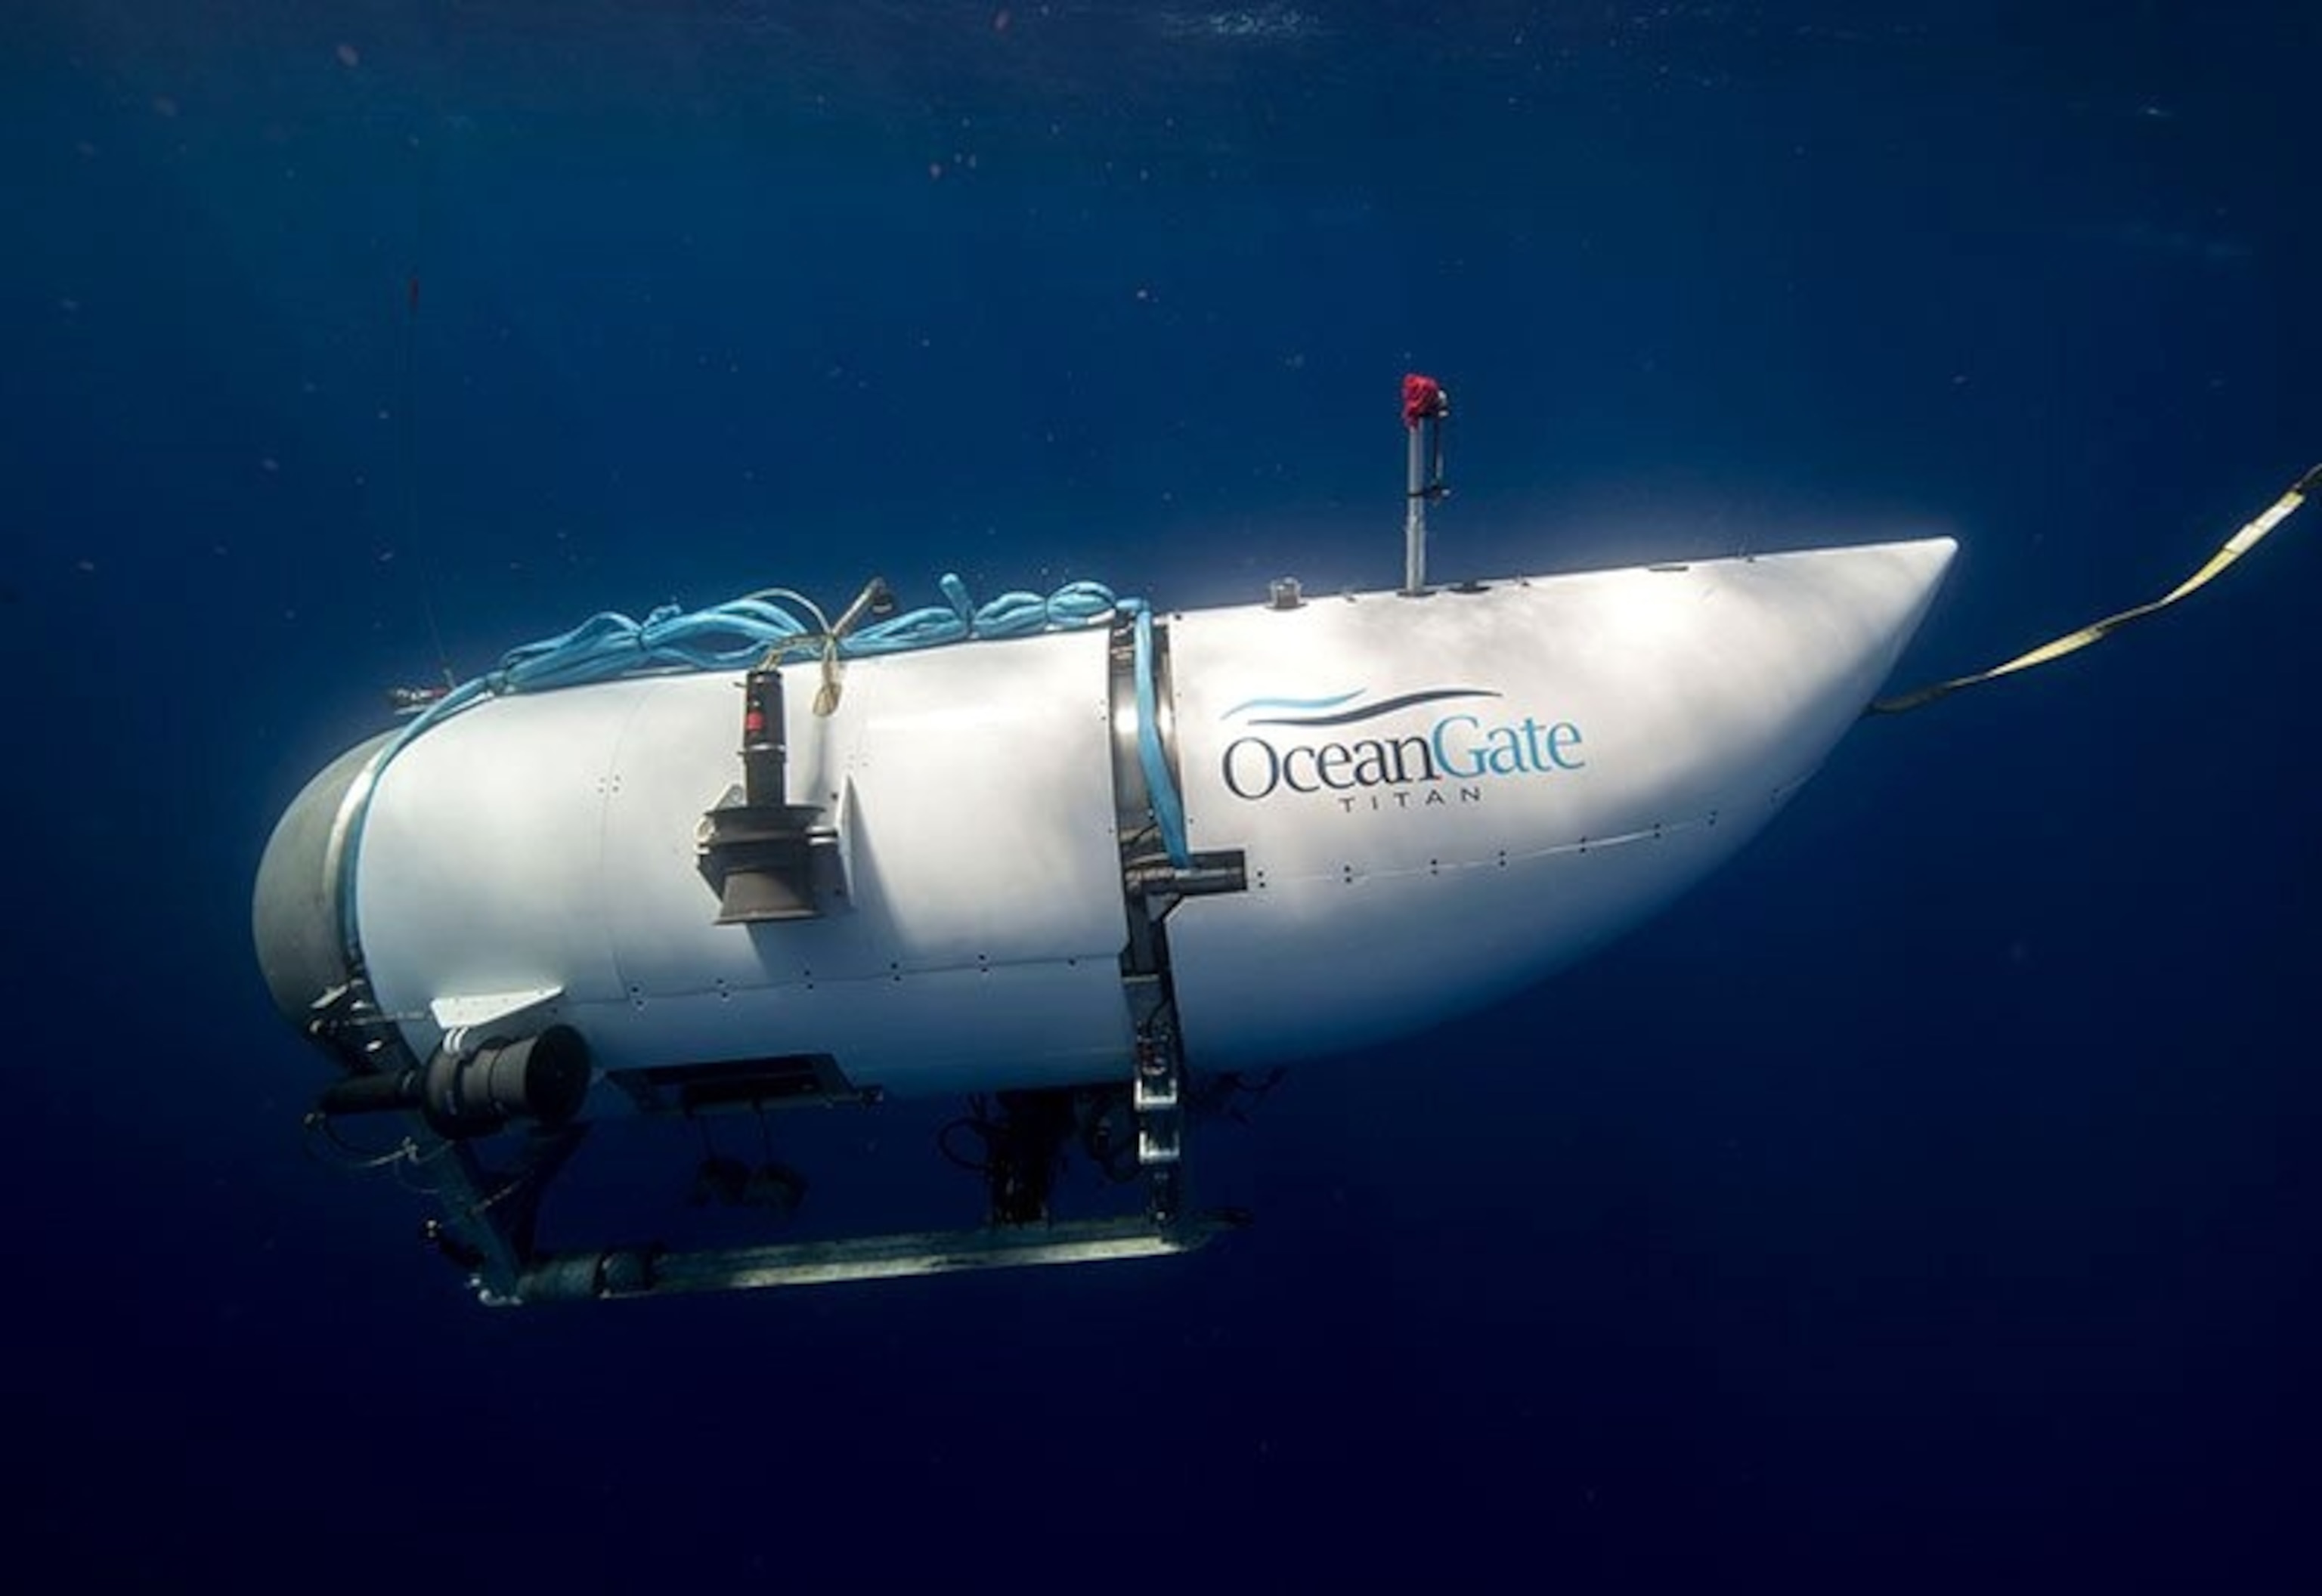 PHOTO: In this undated file photo, the Titan submersible, operated by OceanGate Expeditions to explore the wreckage of the sunken SS Titanic, is shown.